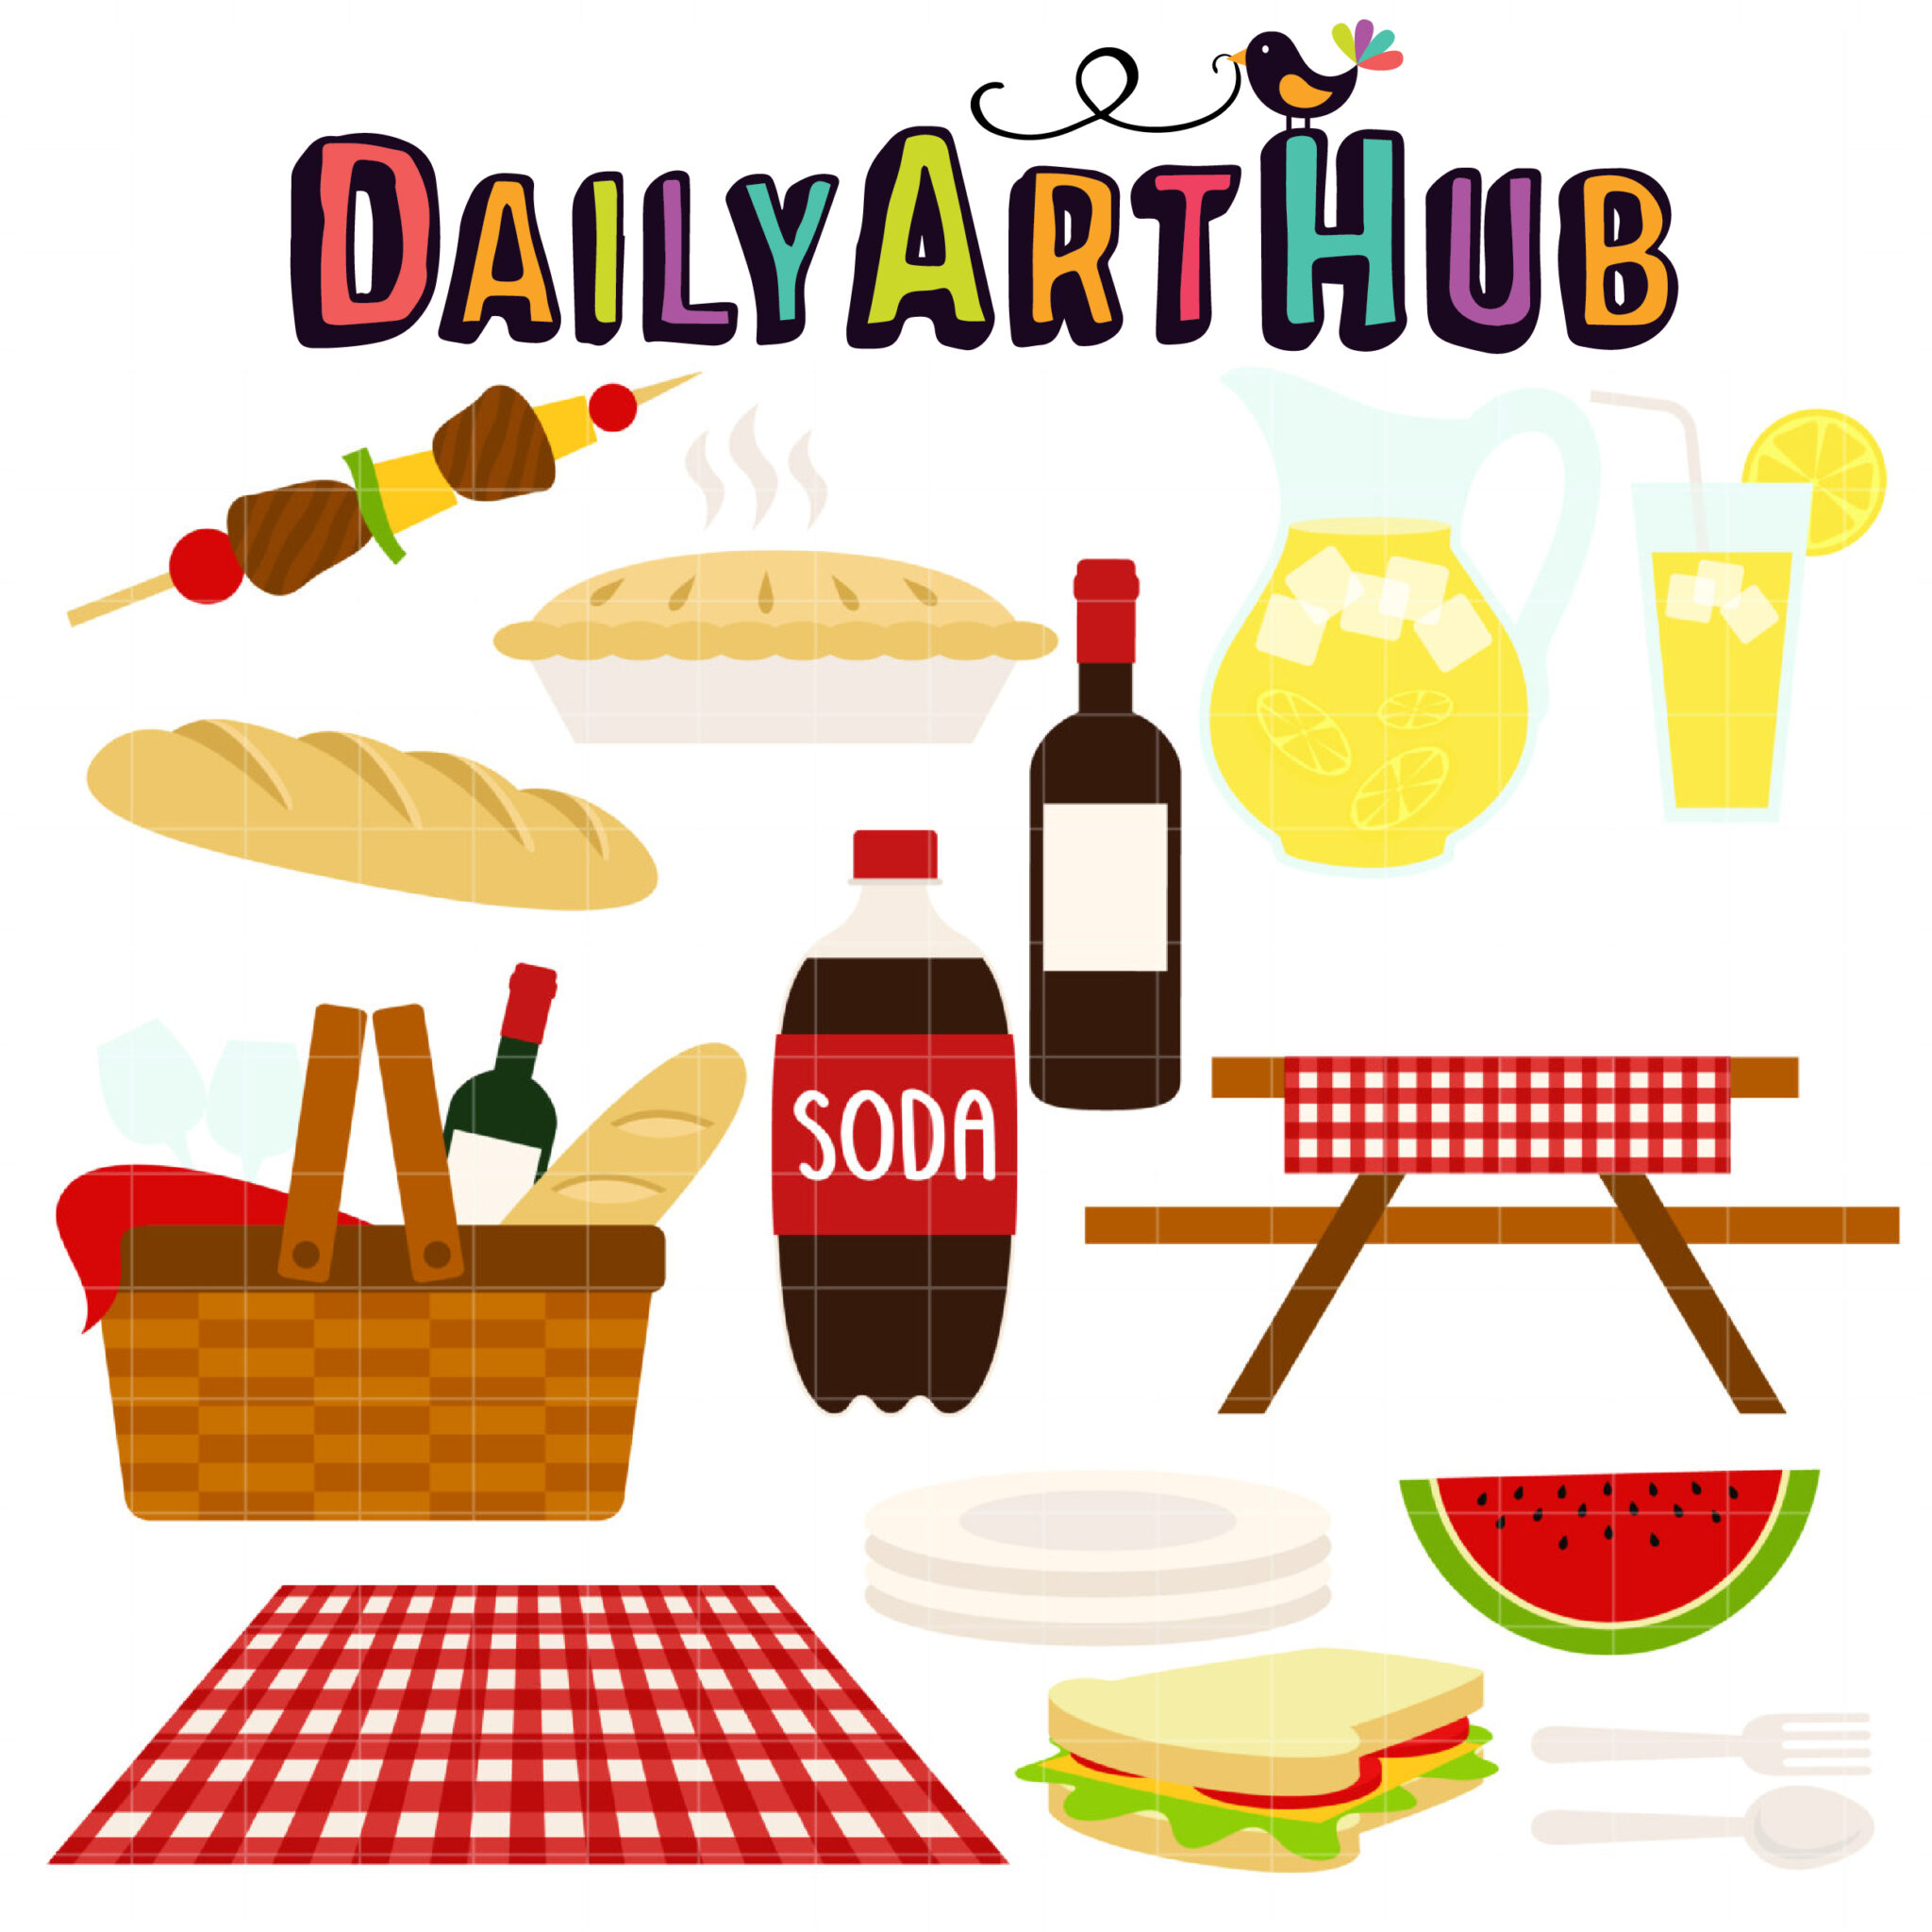 picnic basket with food clipart